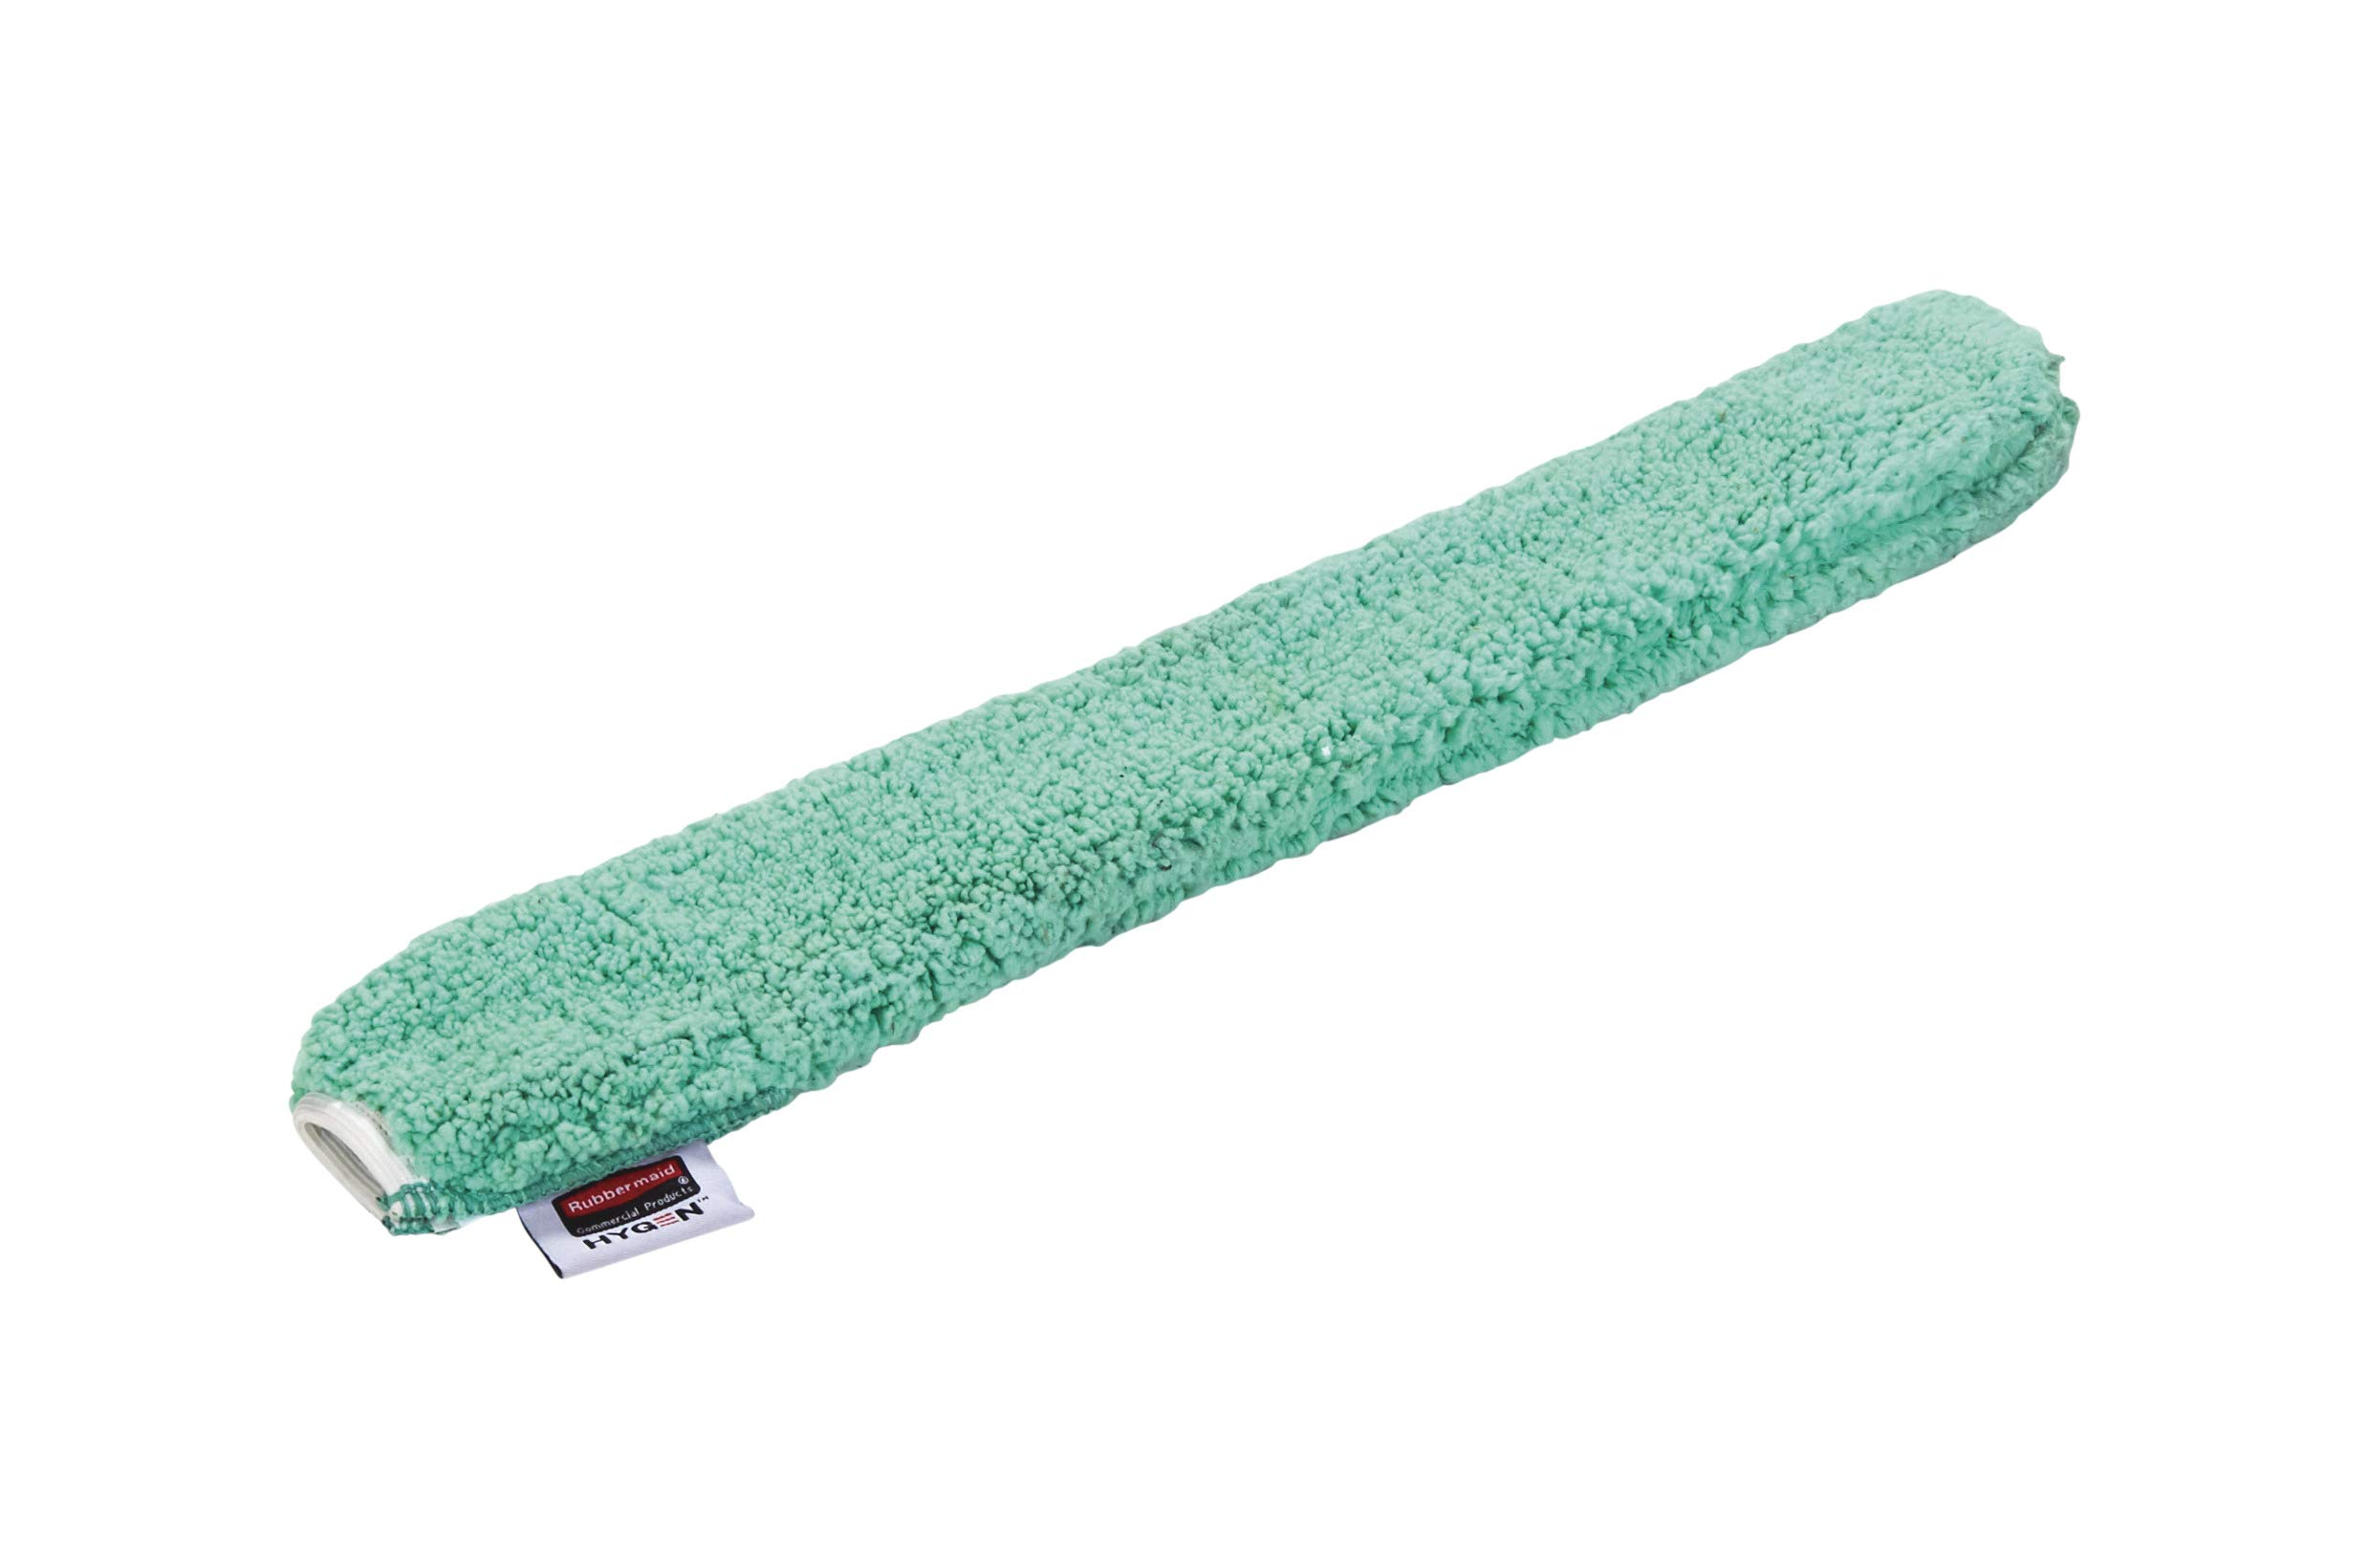 Rubbermaid Commercial Products HYGEN Microfiber Dusting Wand Replacement Sleeve, 22.7-Inch, Green, Cleaning for Ceiling/Tall Spaces